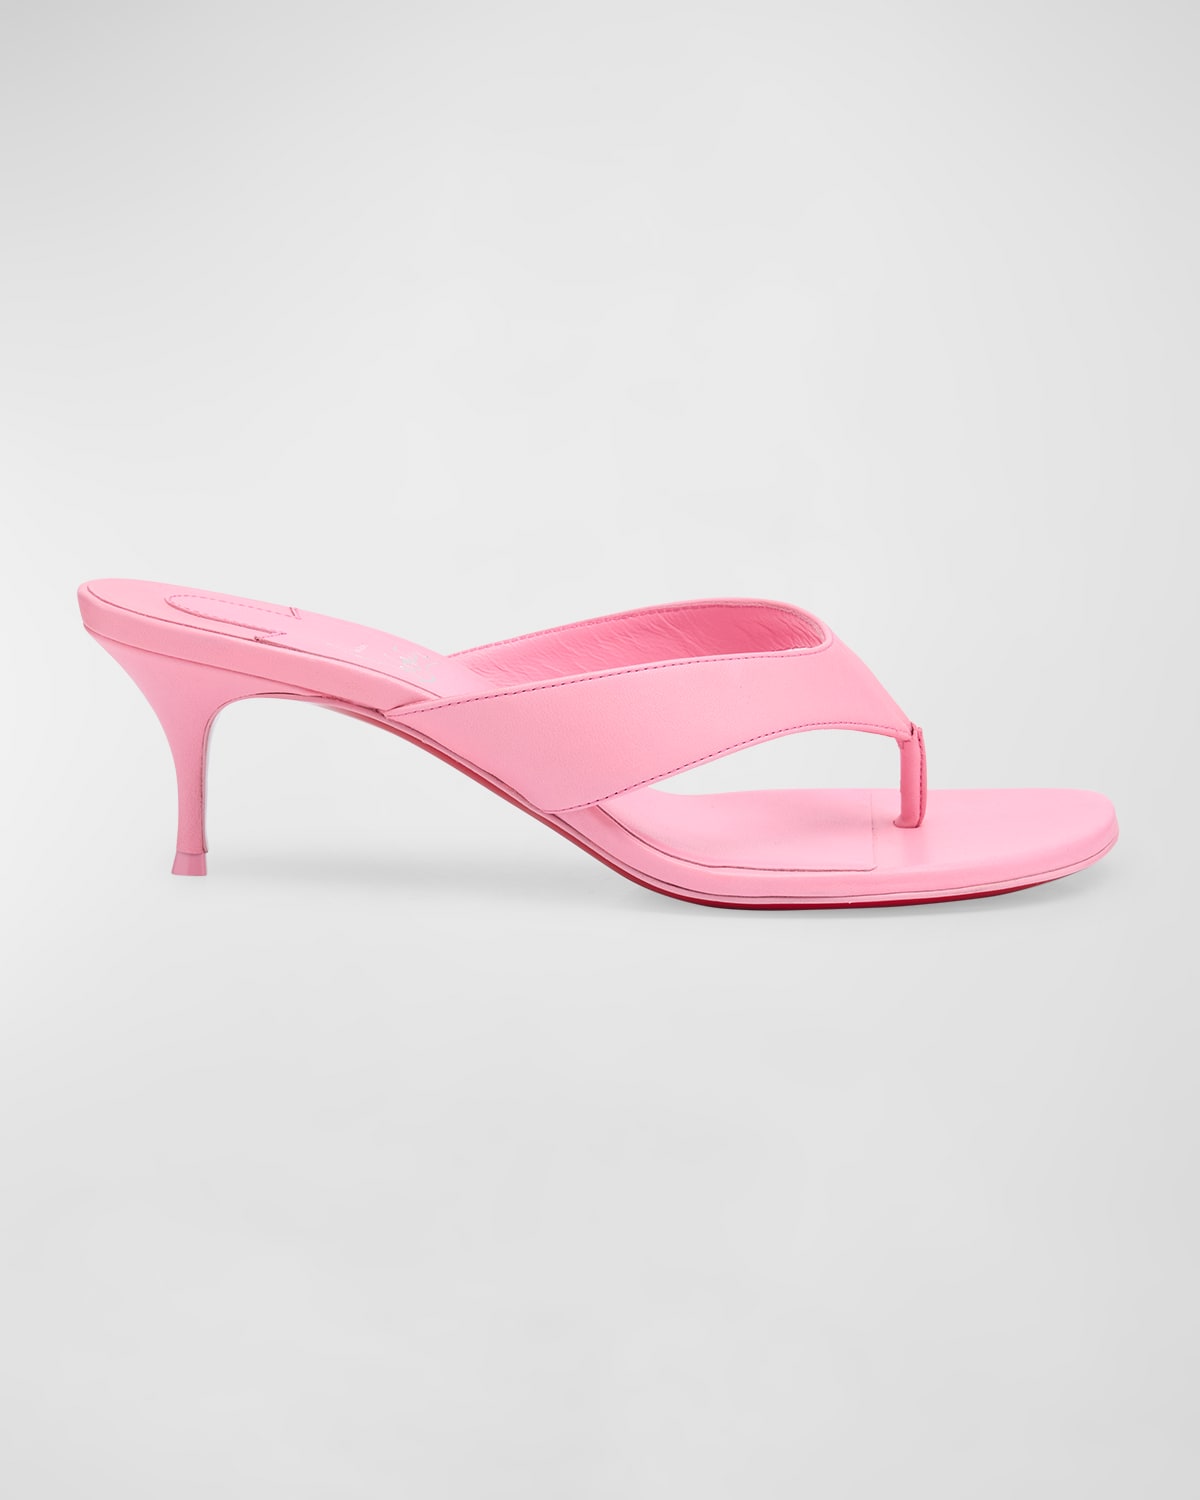 Christian Louboutin Leather Thong Red Sole Slide Sandals In Pink